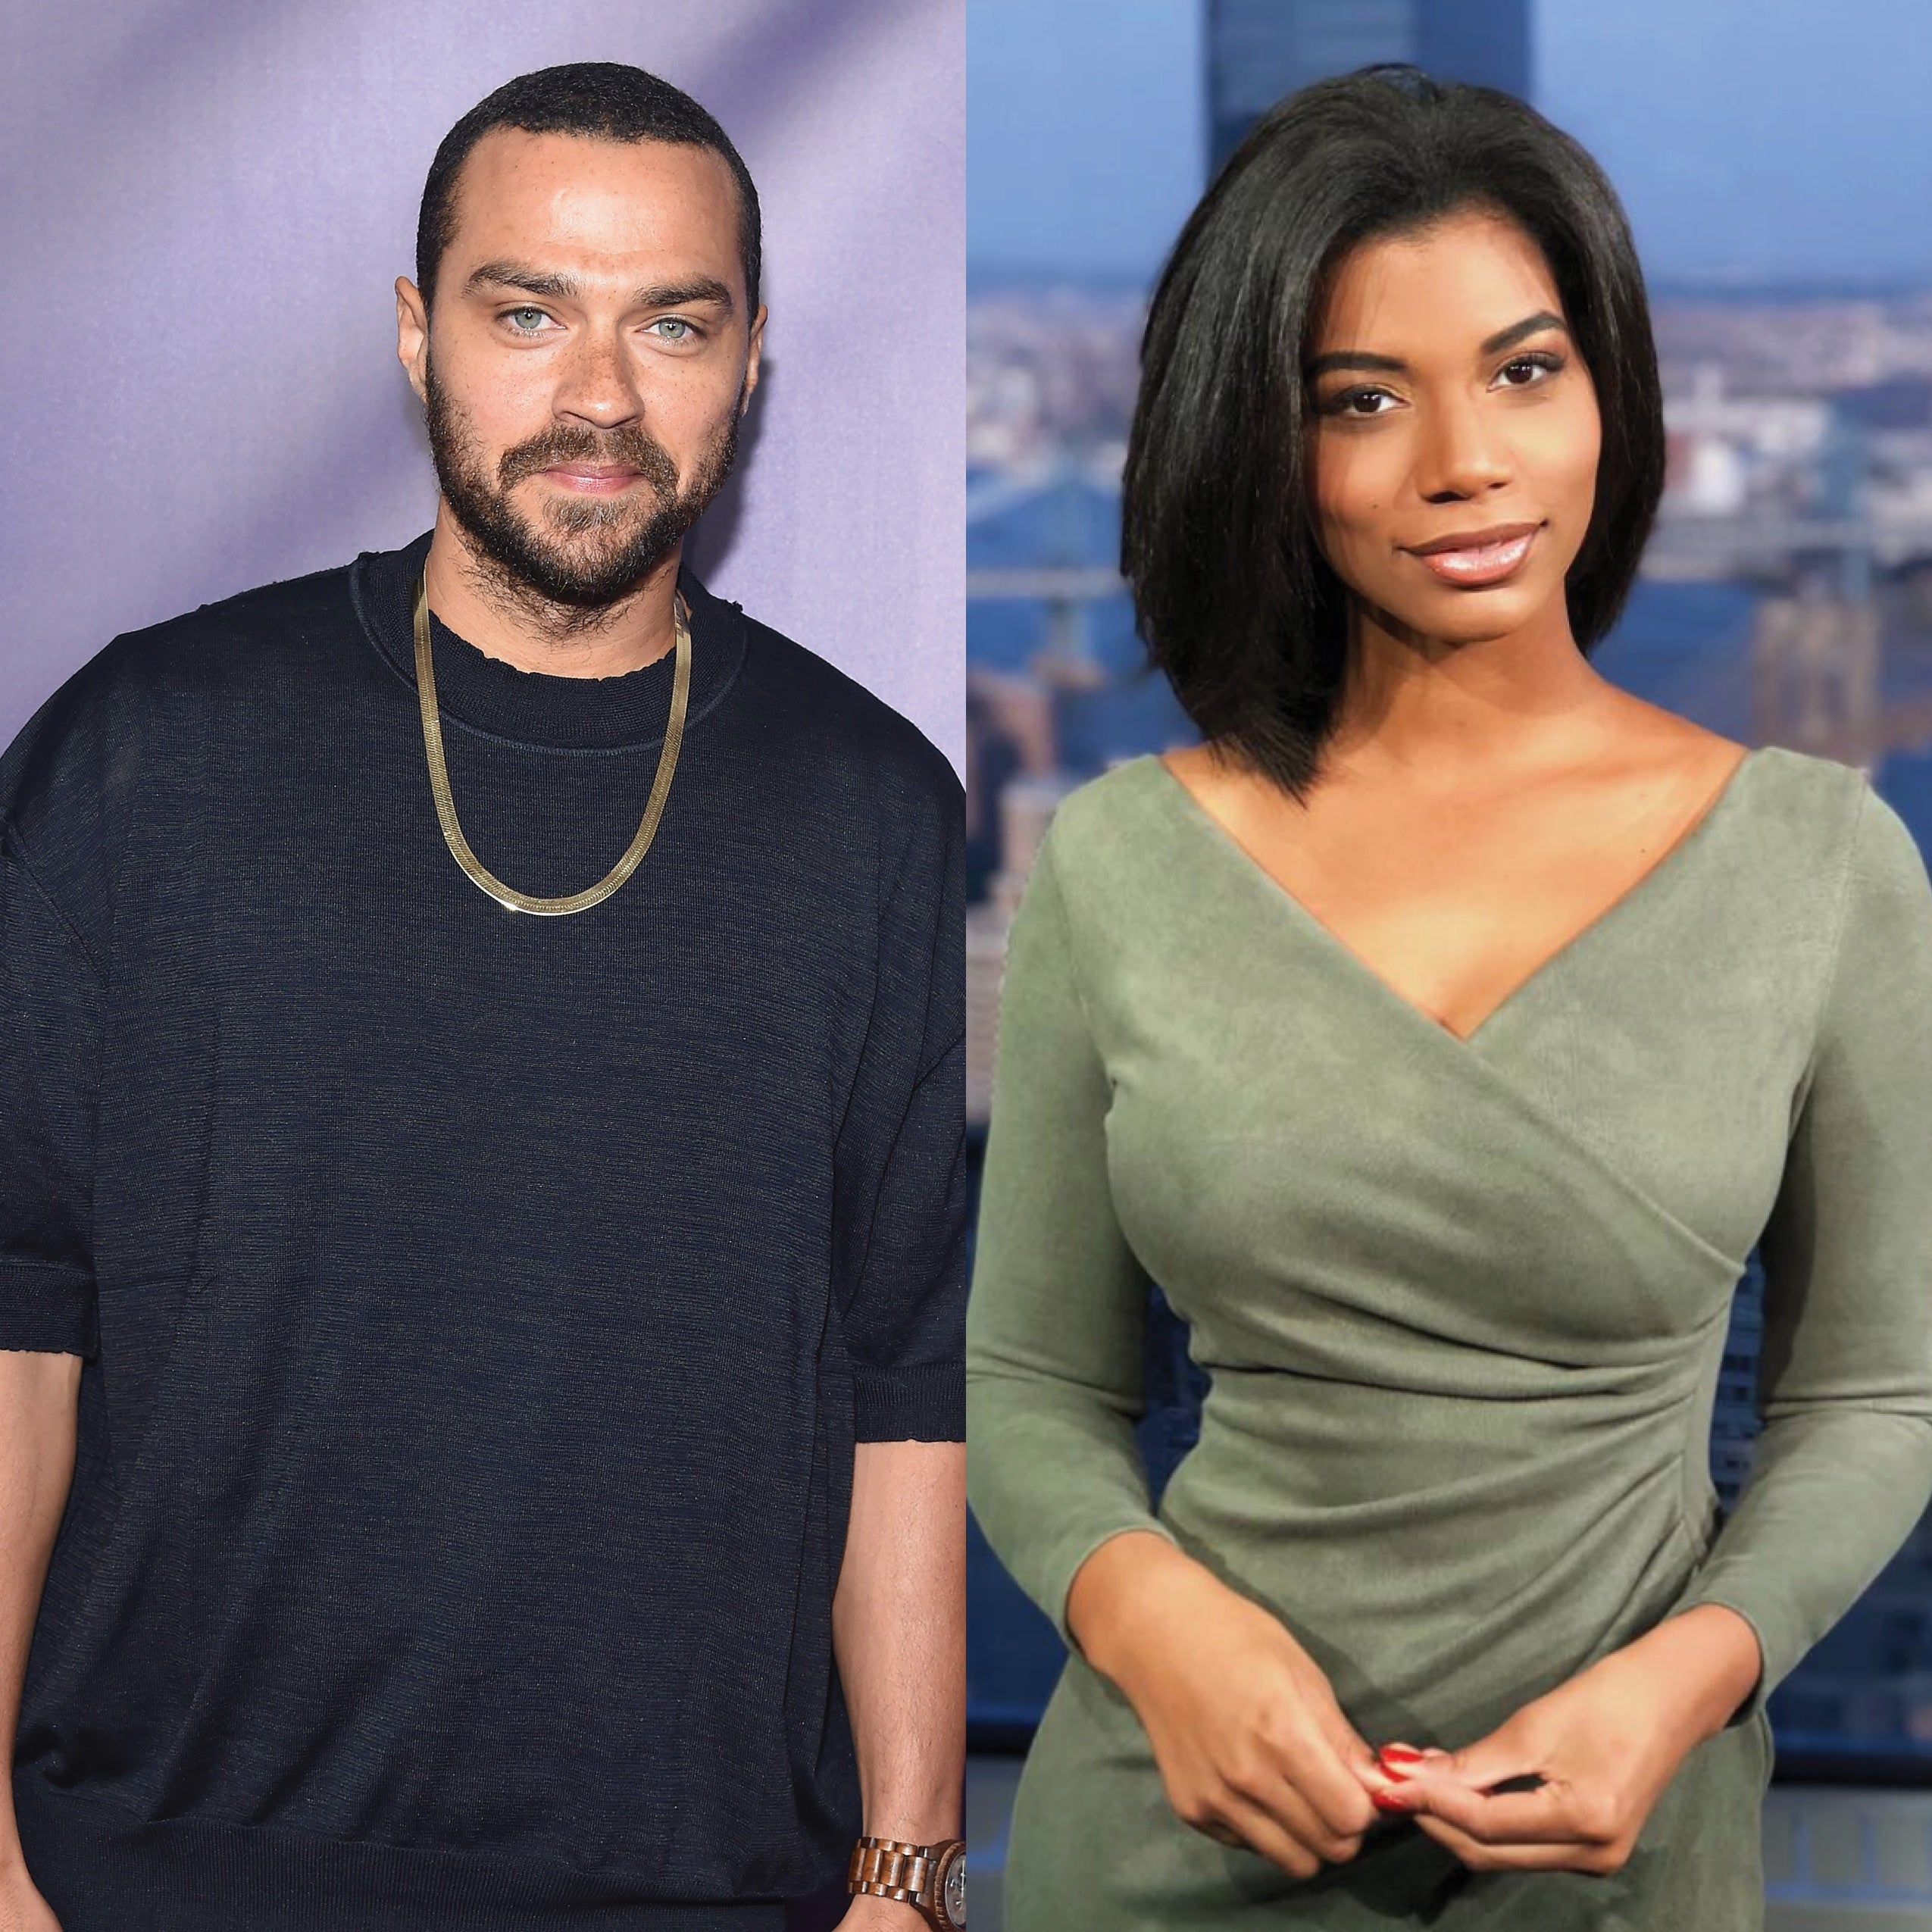 Jesse Williams Is Dating Sports Reporter Taylor Rooks
